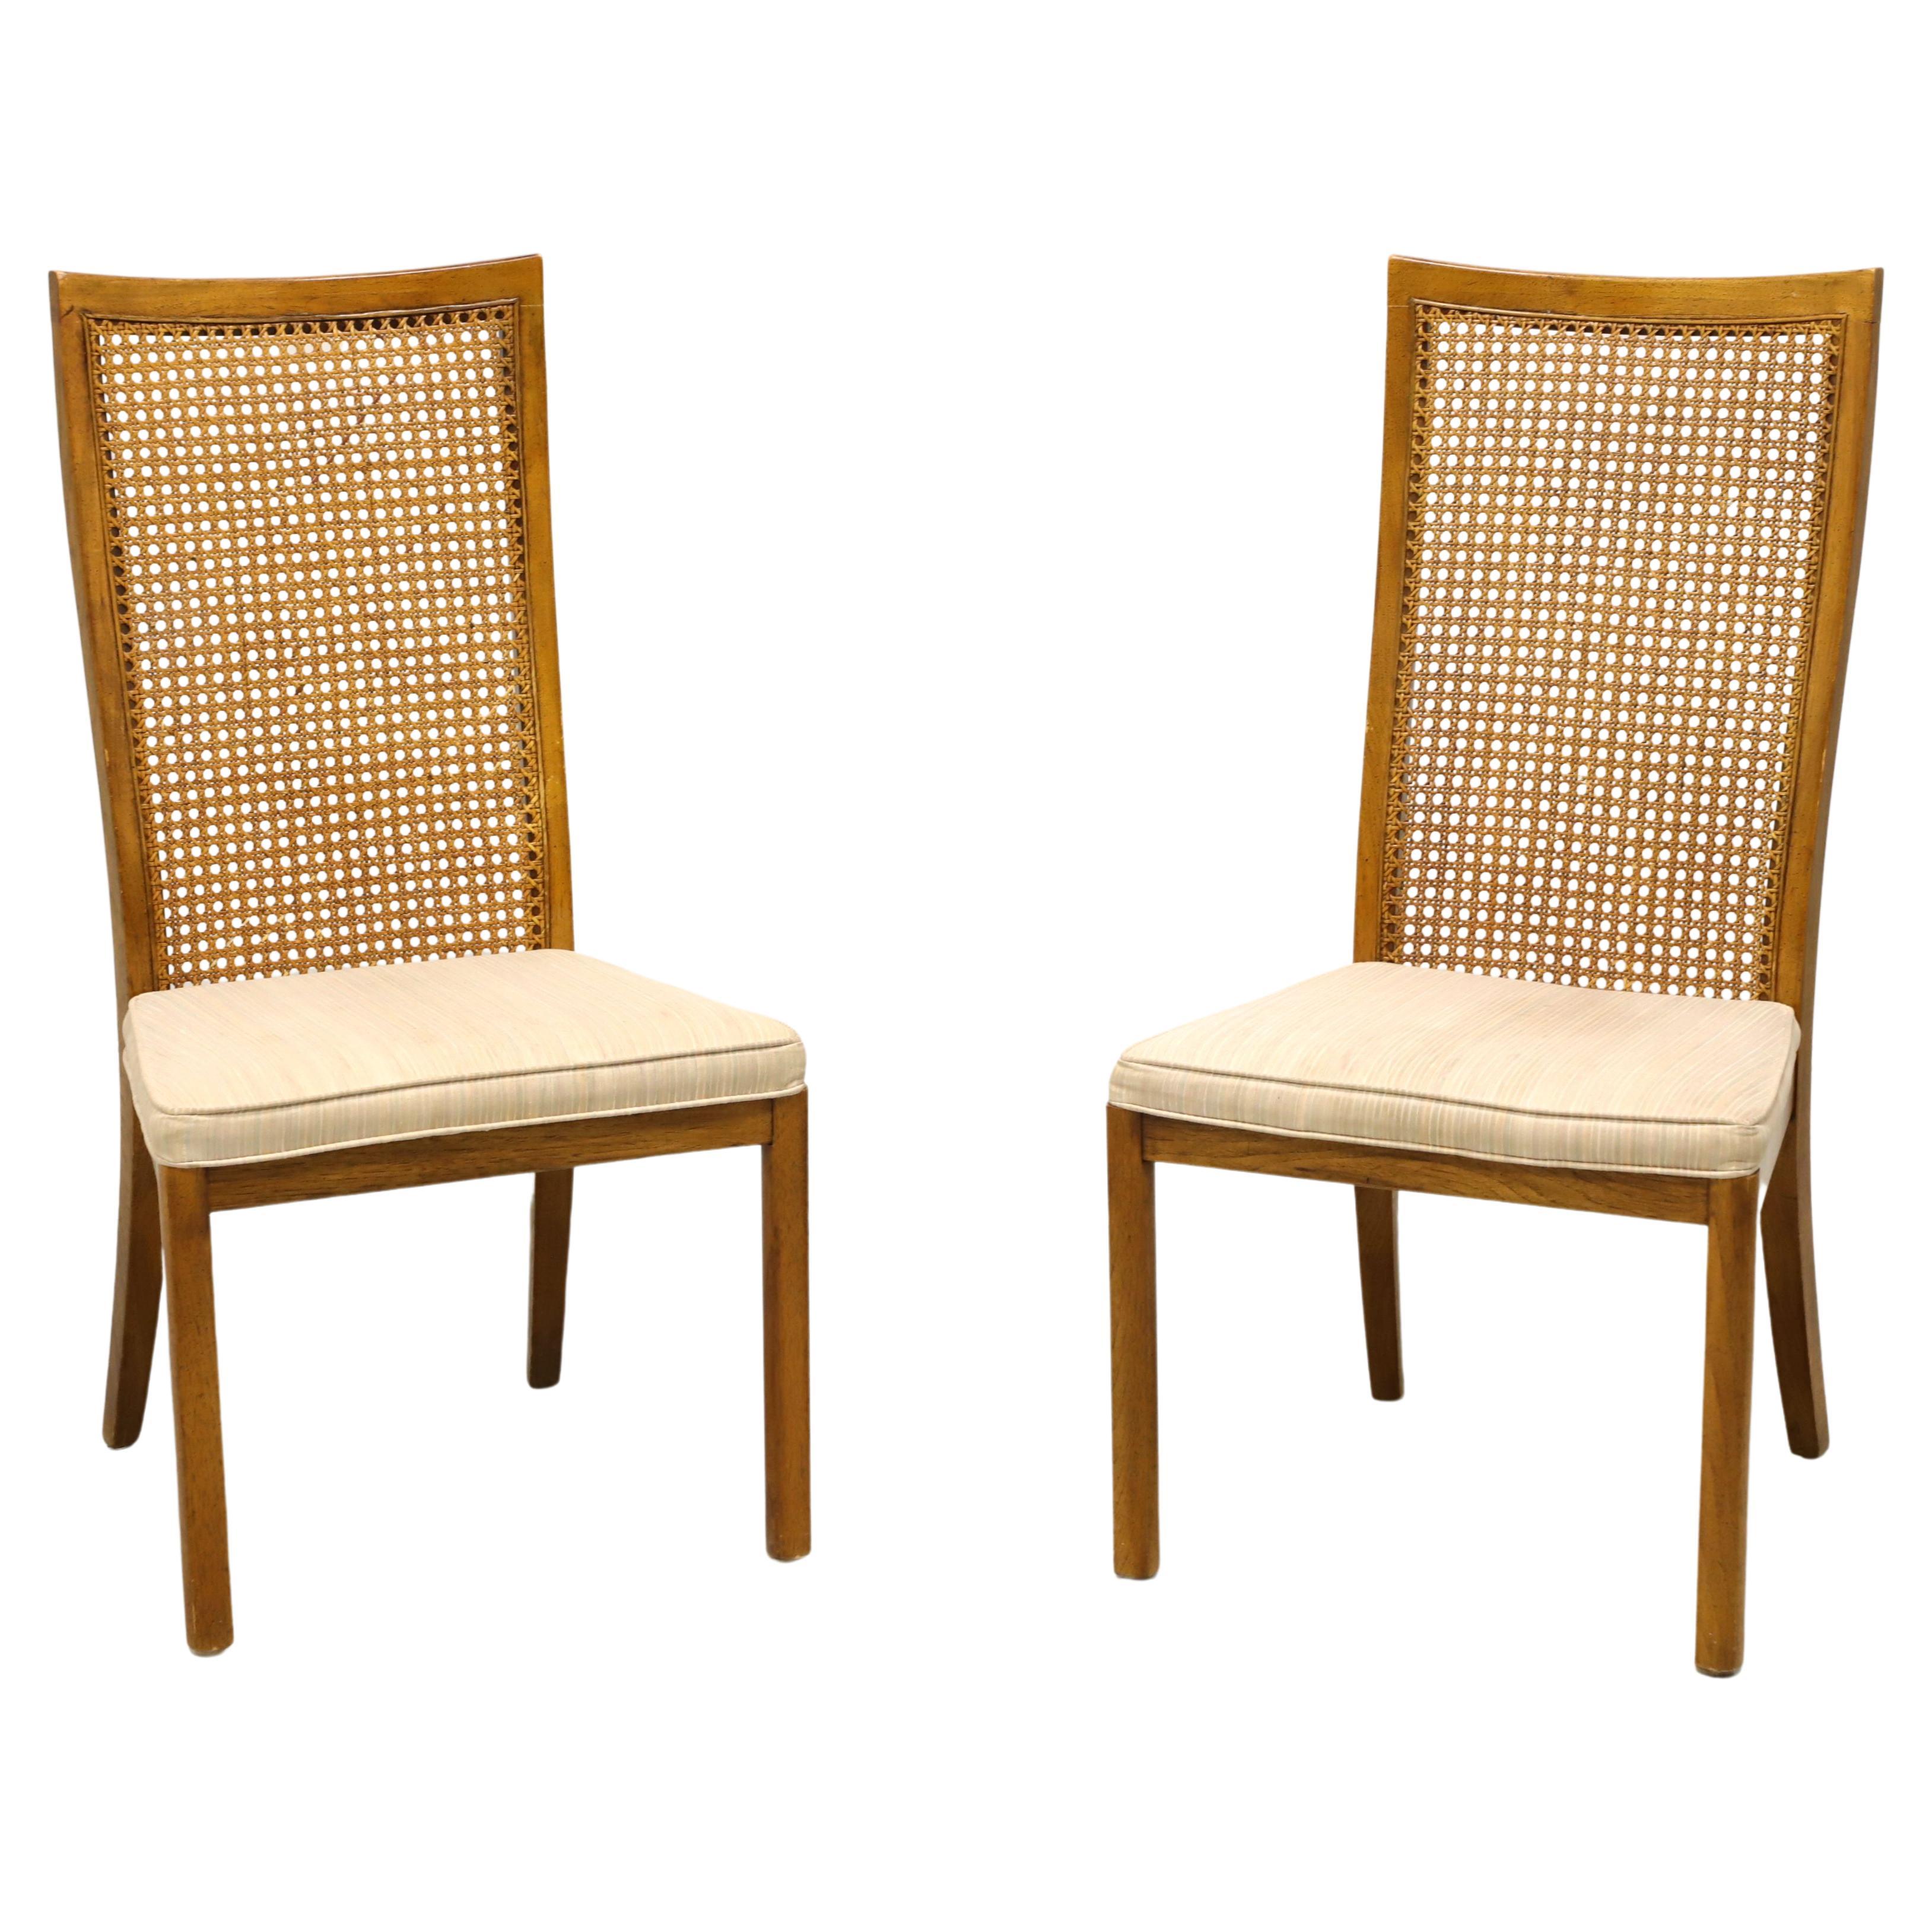 DREXEL Accolade Campaign Style Dining Side Chairs - Pair B